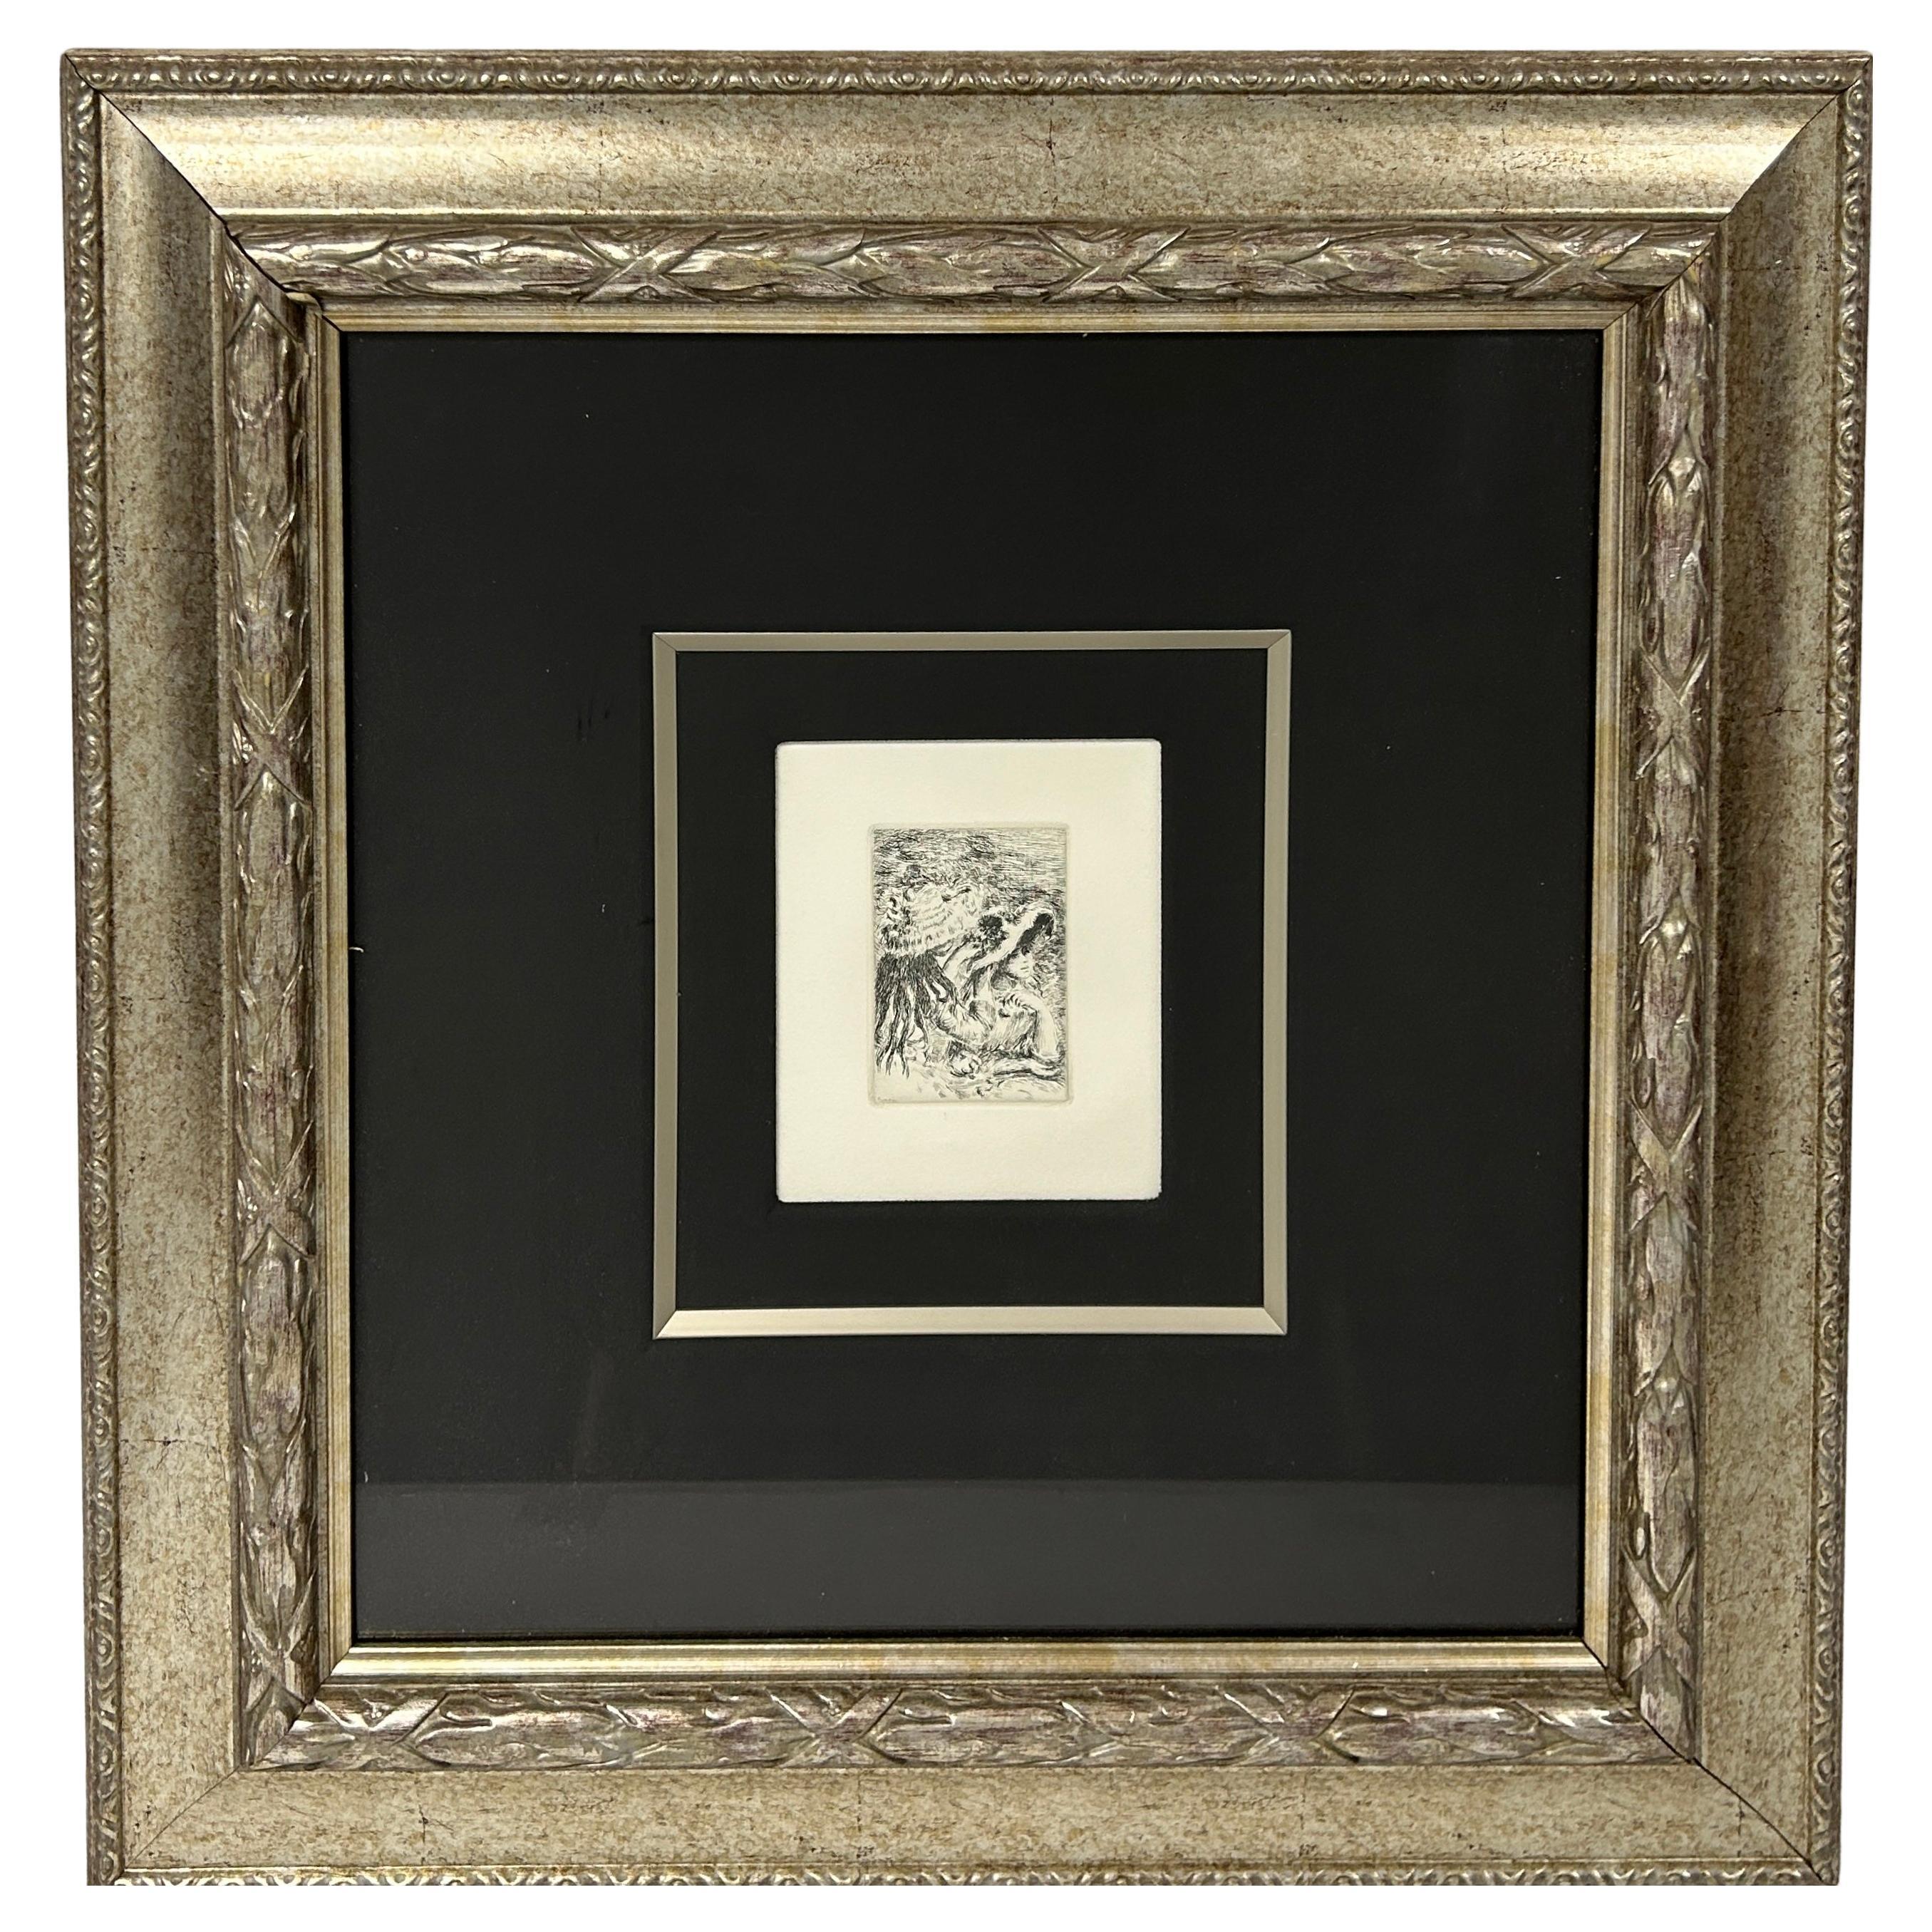 Limited Edition Renoir Lithograph, "Le Chapeau Epingle" (Pinning the Hat) For Sale